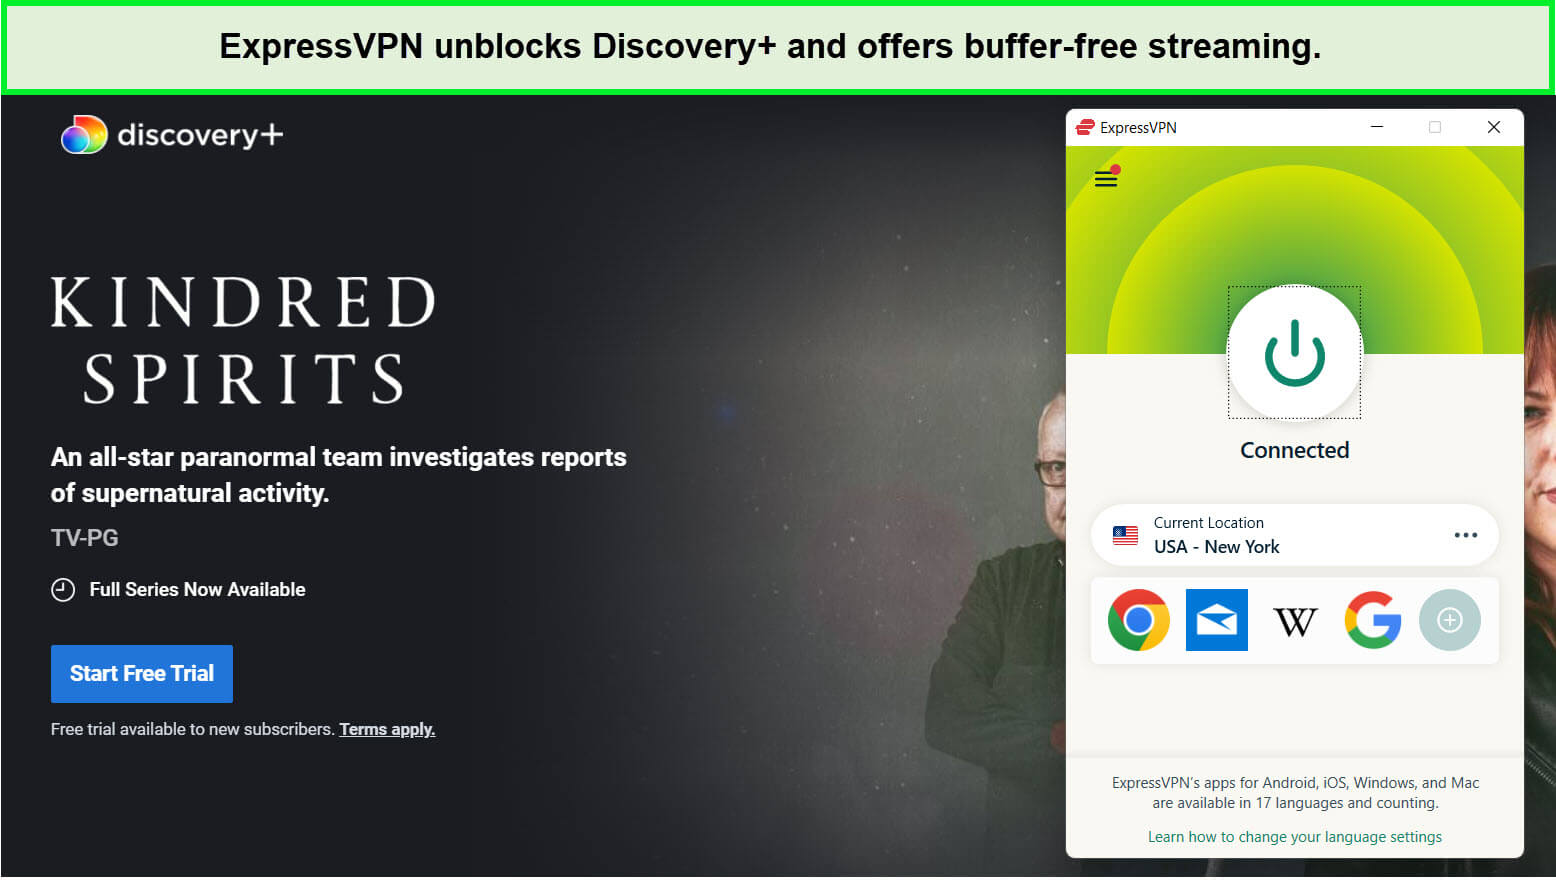 expressvpn-unblocks-kindred-spirits-s7-on-discovery-plus-outside-usa